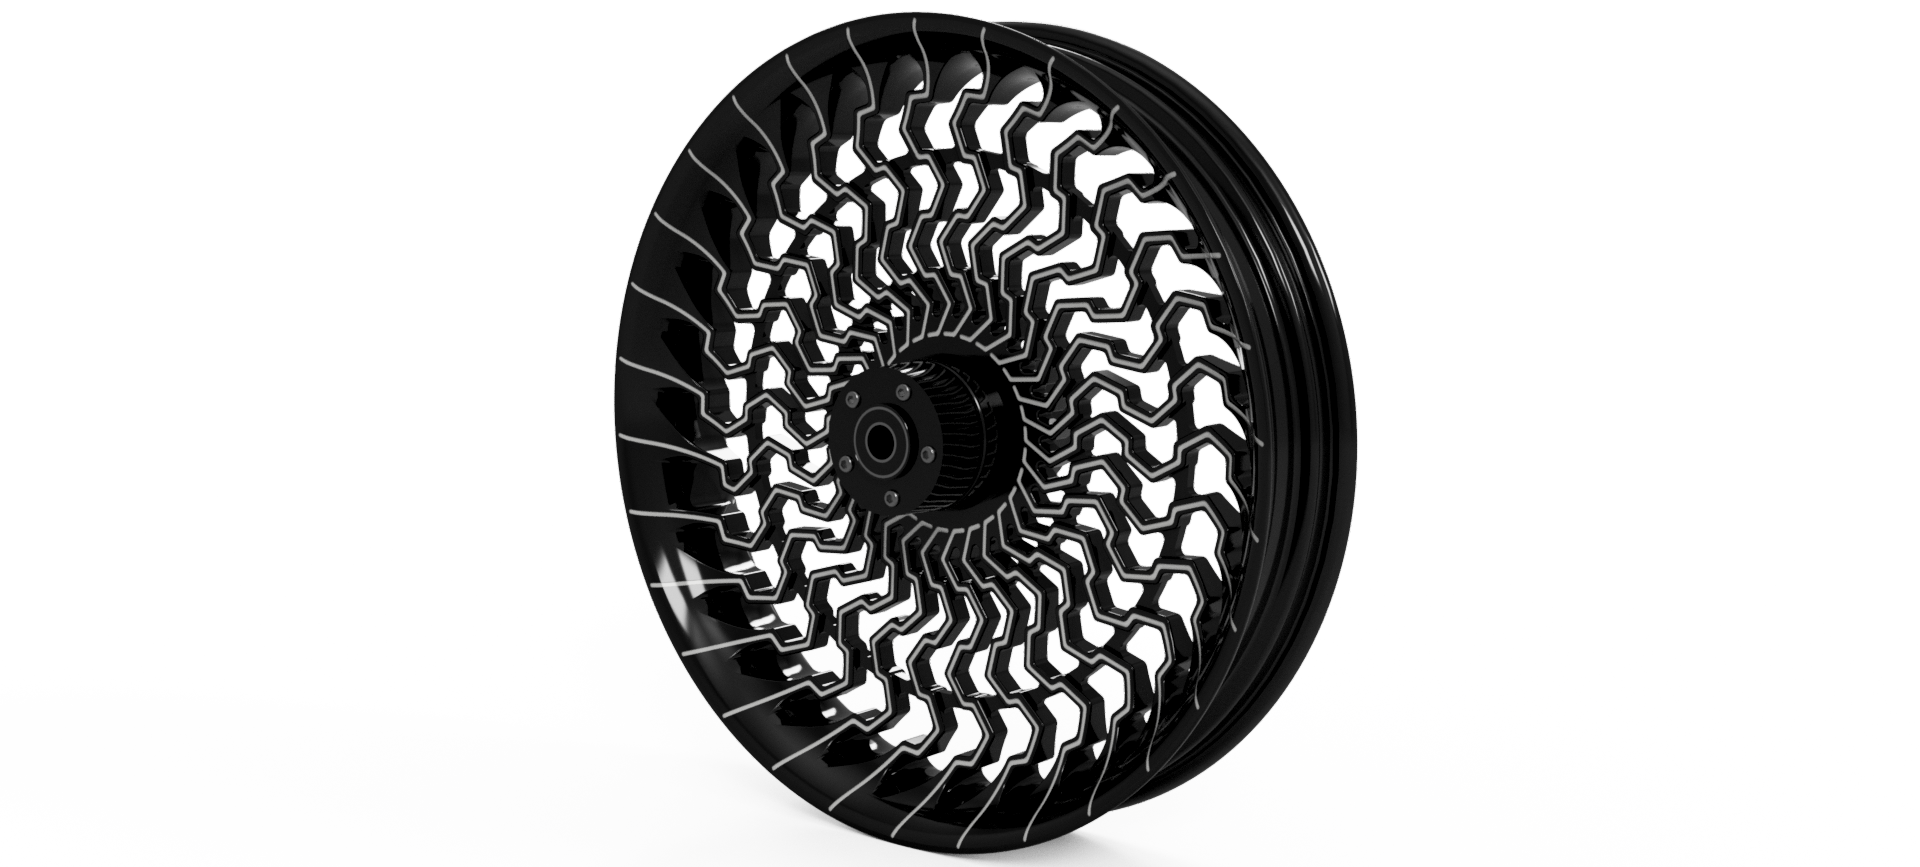 Tommy&Sons 23"x3,75" front wheel for harley davidson Touring render perspective